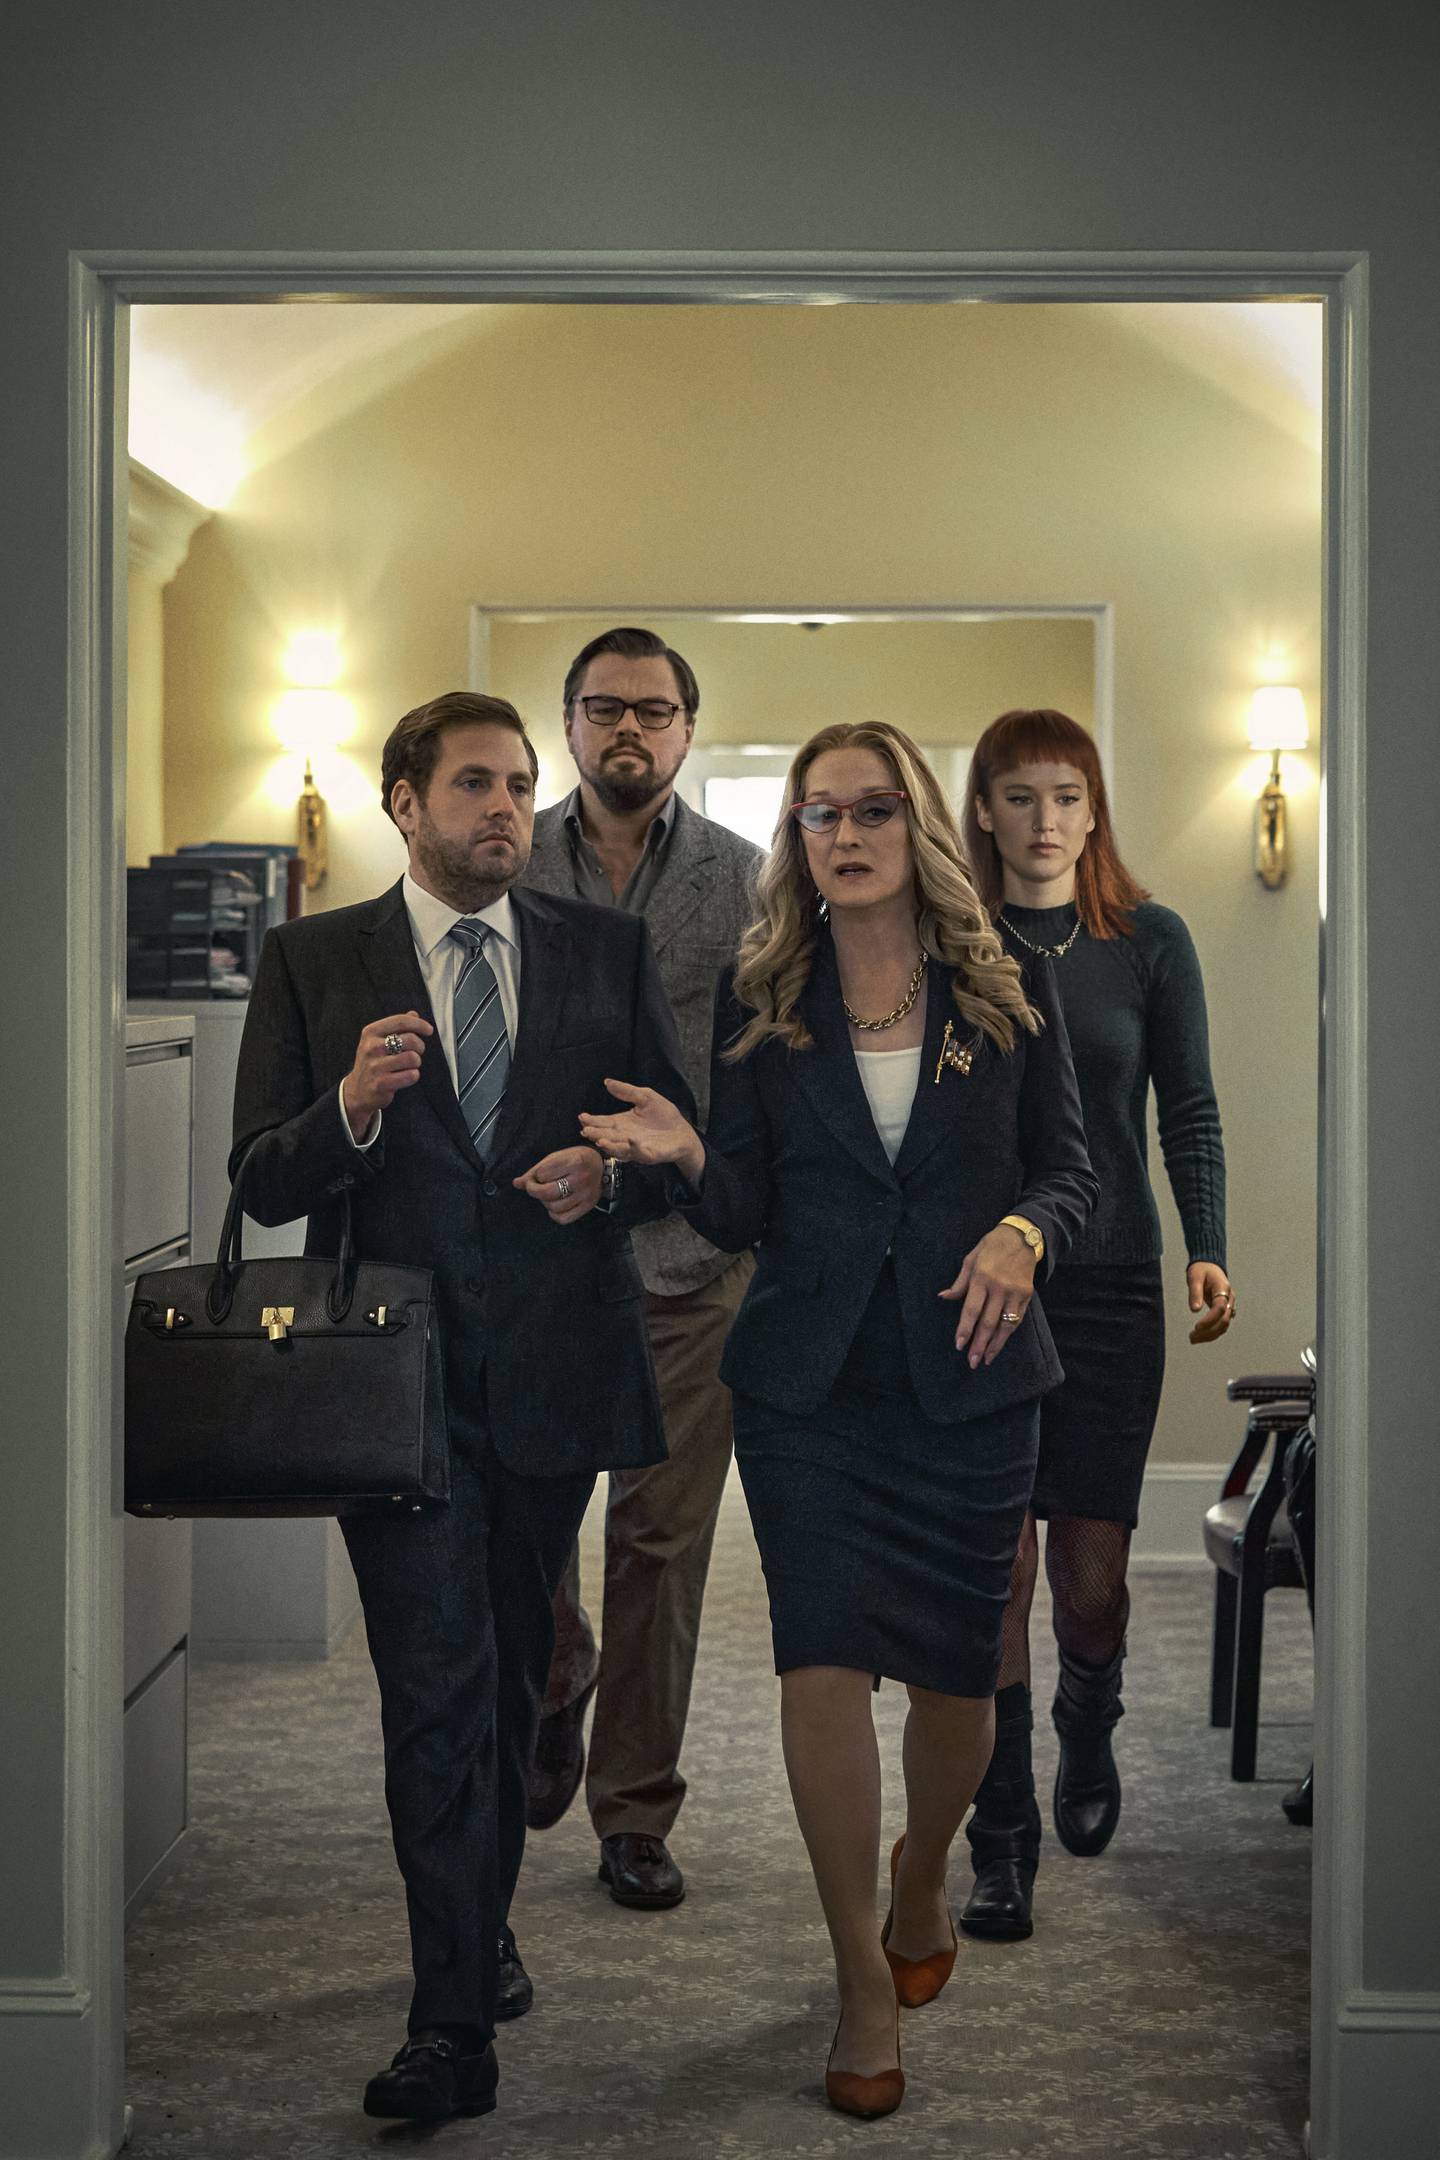 Besides DiCaprio and Lawrence, the ensemble cast also includes Jonah Hill and Meryl Streep, who plays the US president. Photo: Netflix